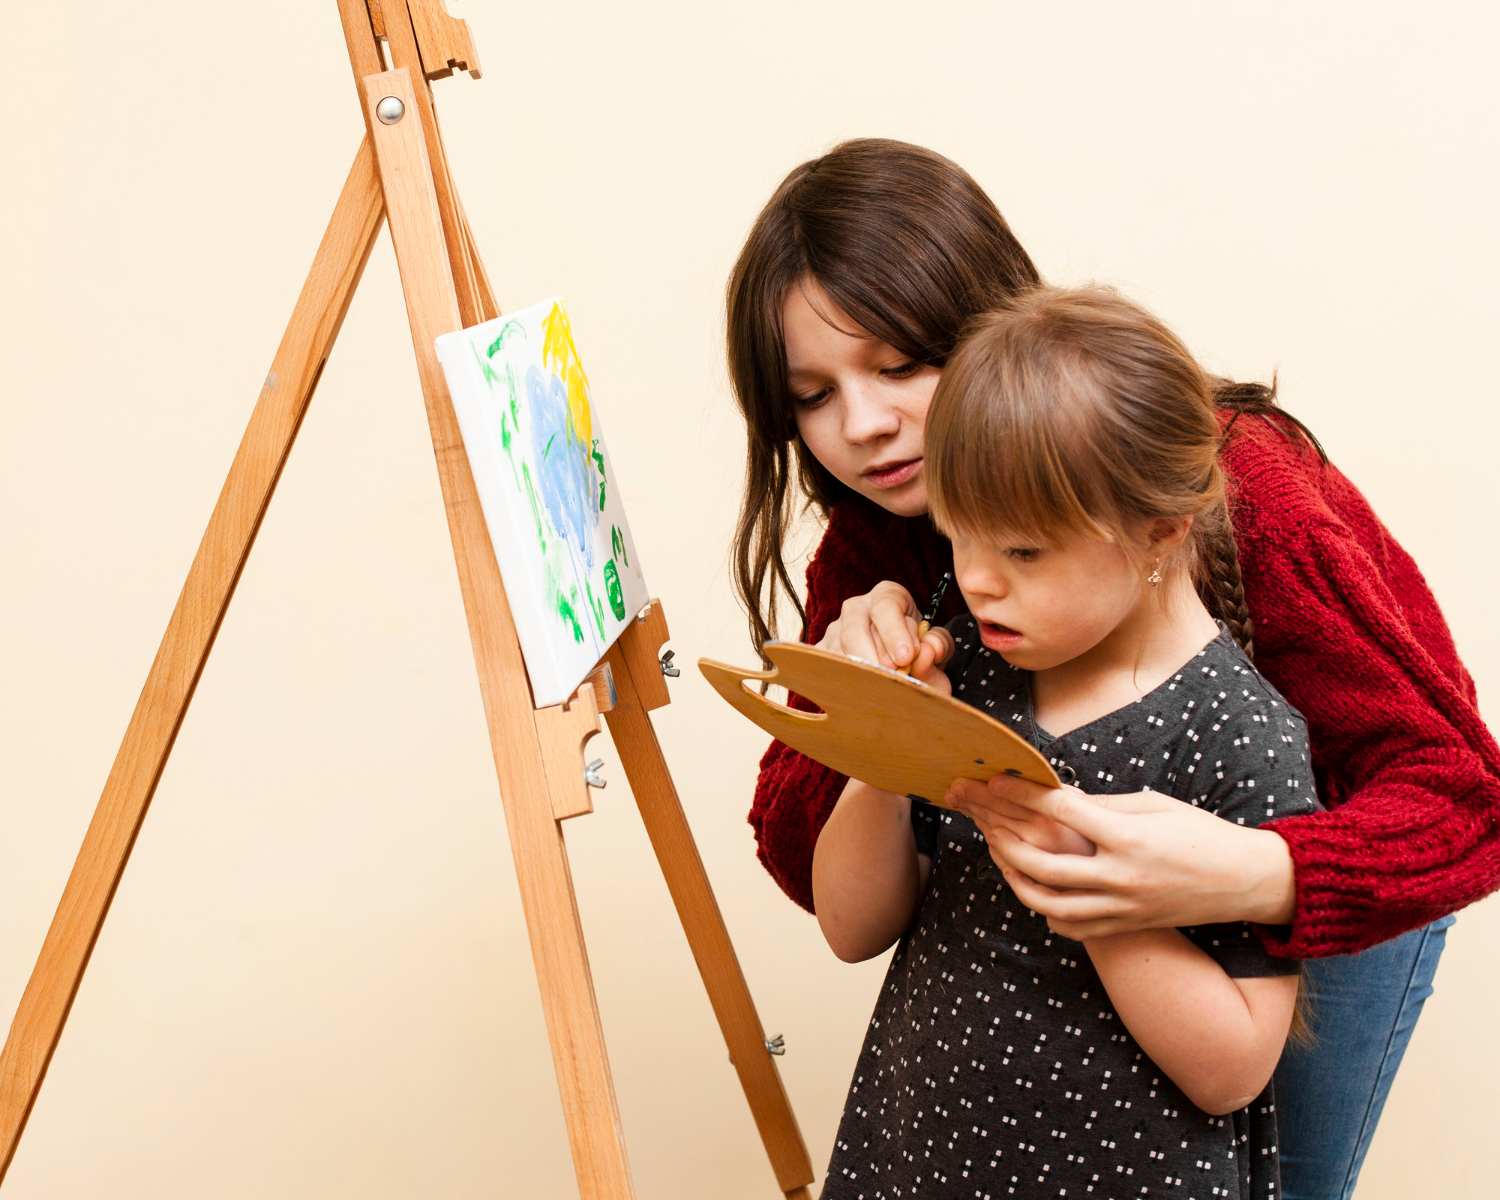 A girl is helping a little girl with down syndrome in painting.